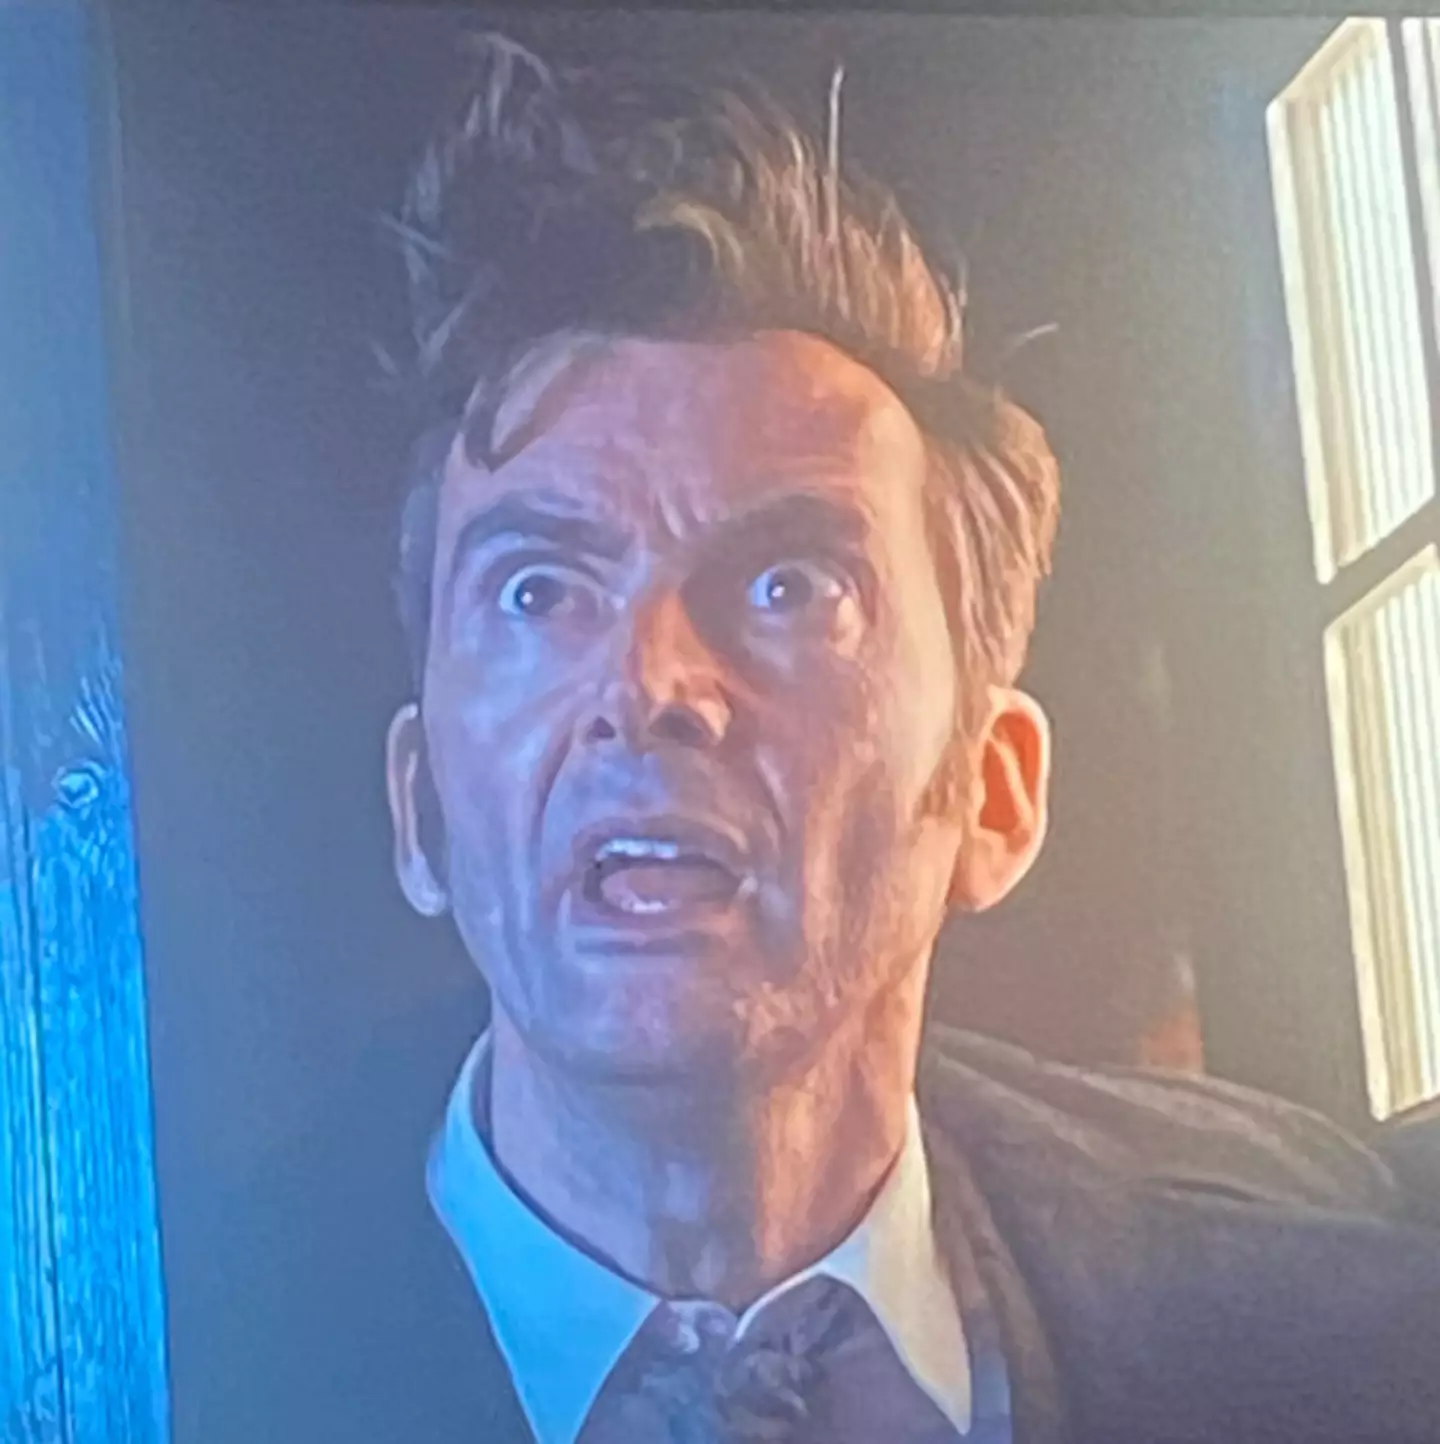 Fans were thrilled to see Tennant back as Doctor Who.